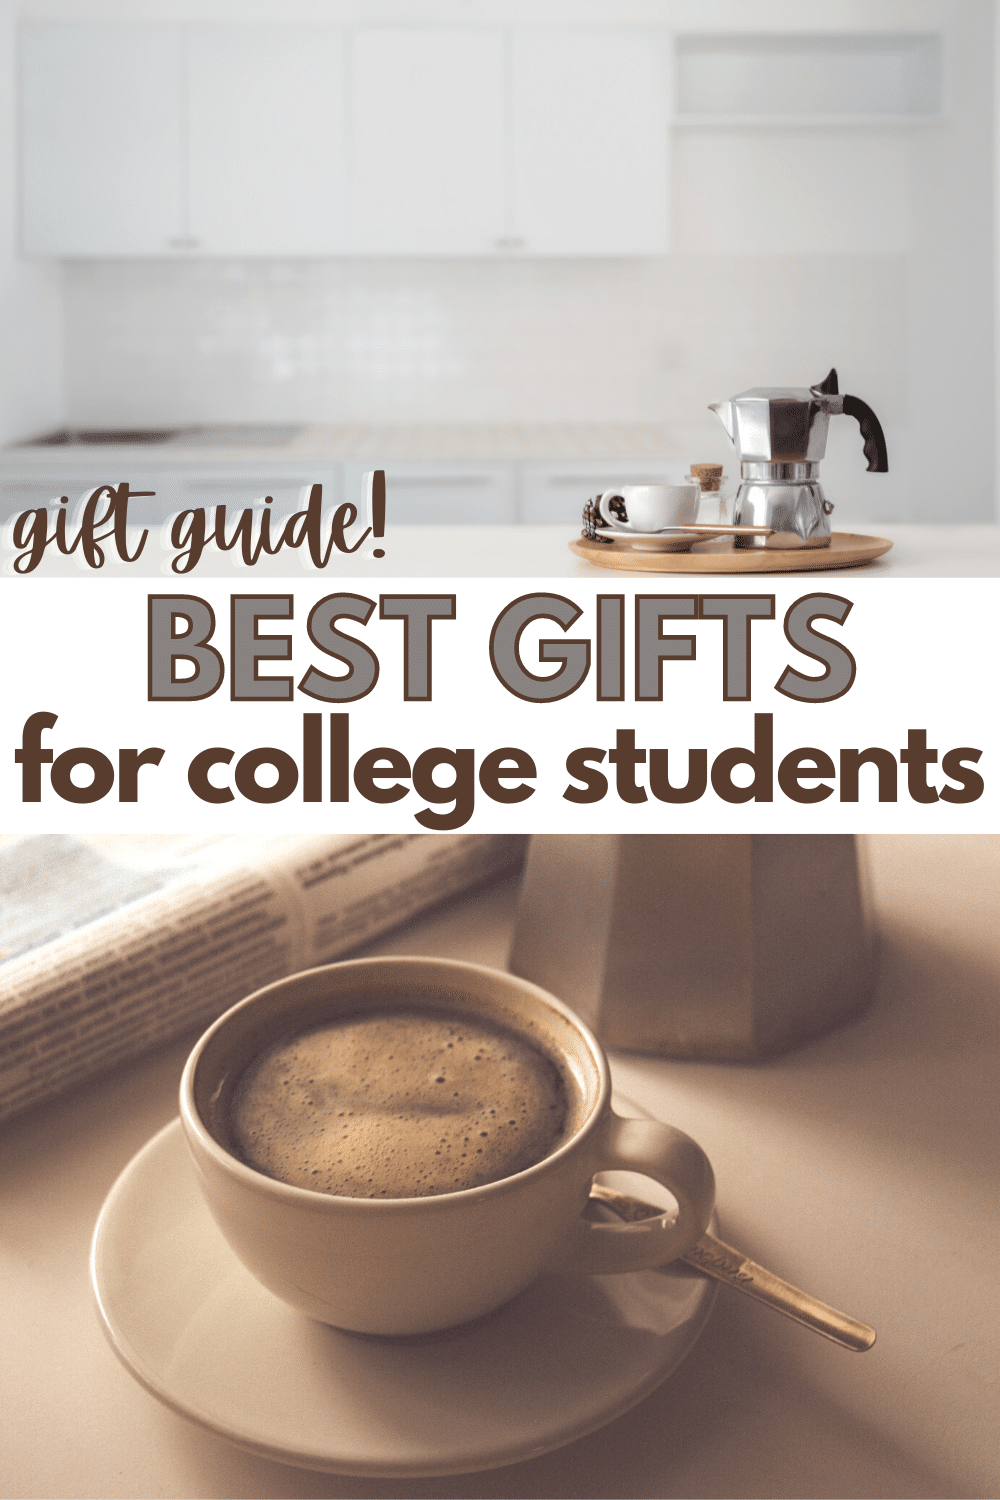 Here's a list of the best gifts for college students. There's ideas for entertainment, studying, making them feel at home, technology, & of course, clothes. #giftguide #giftideas #collegestudents via @wondermomwannab